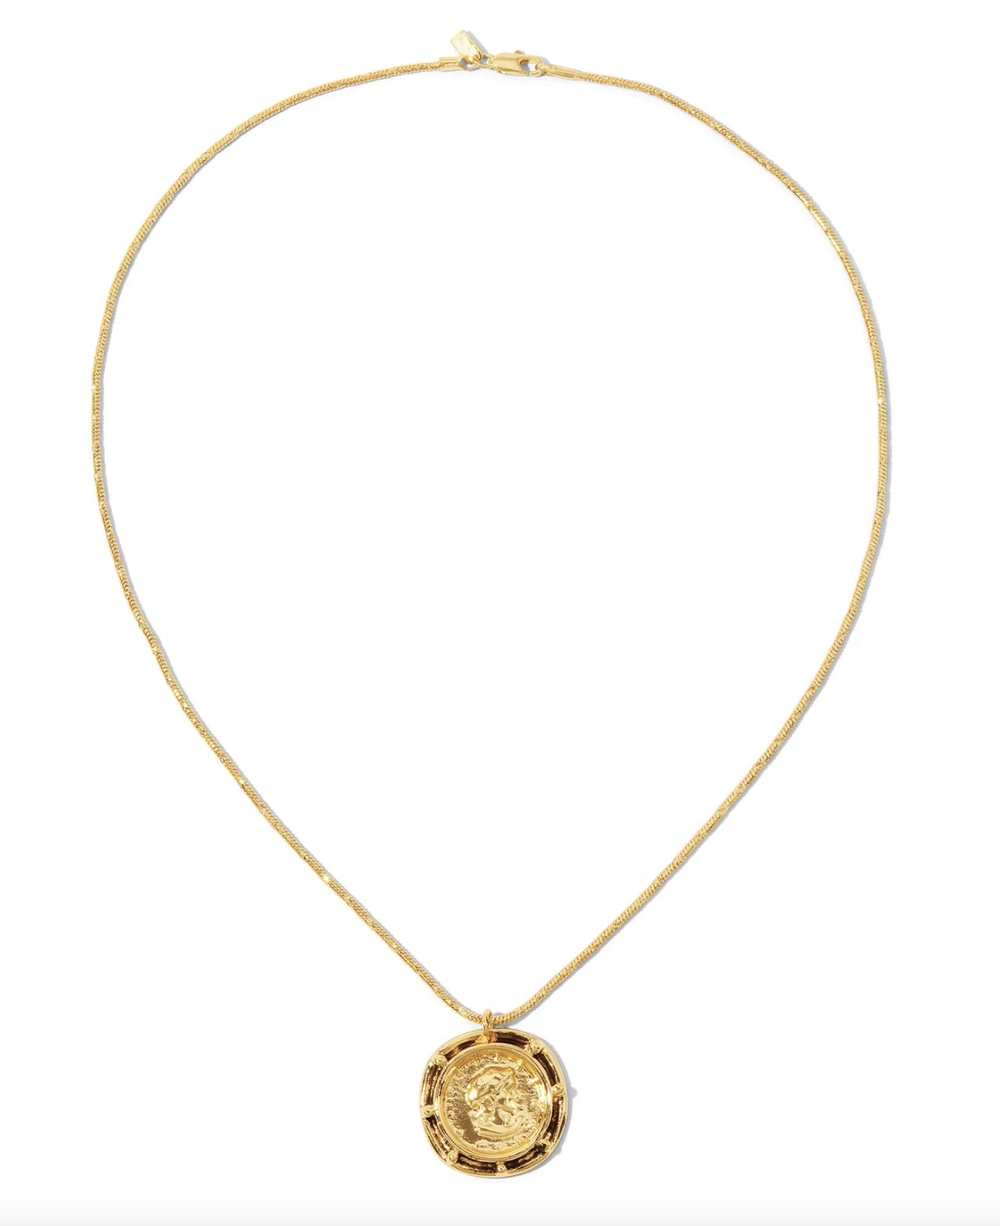 Gianni Coin Necklace by Vanessa Mooney